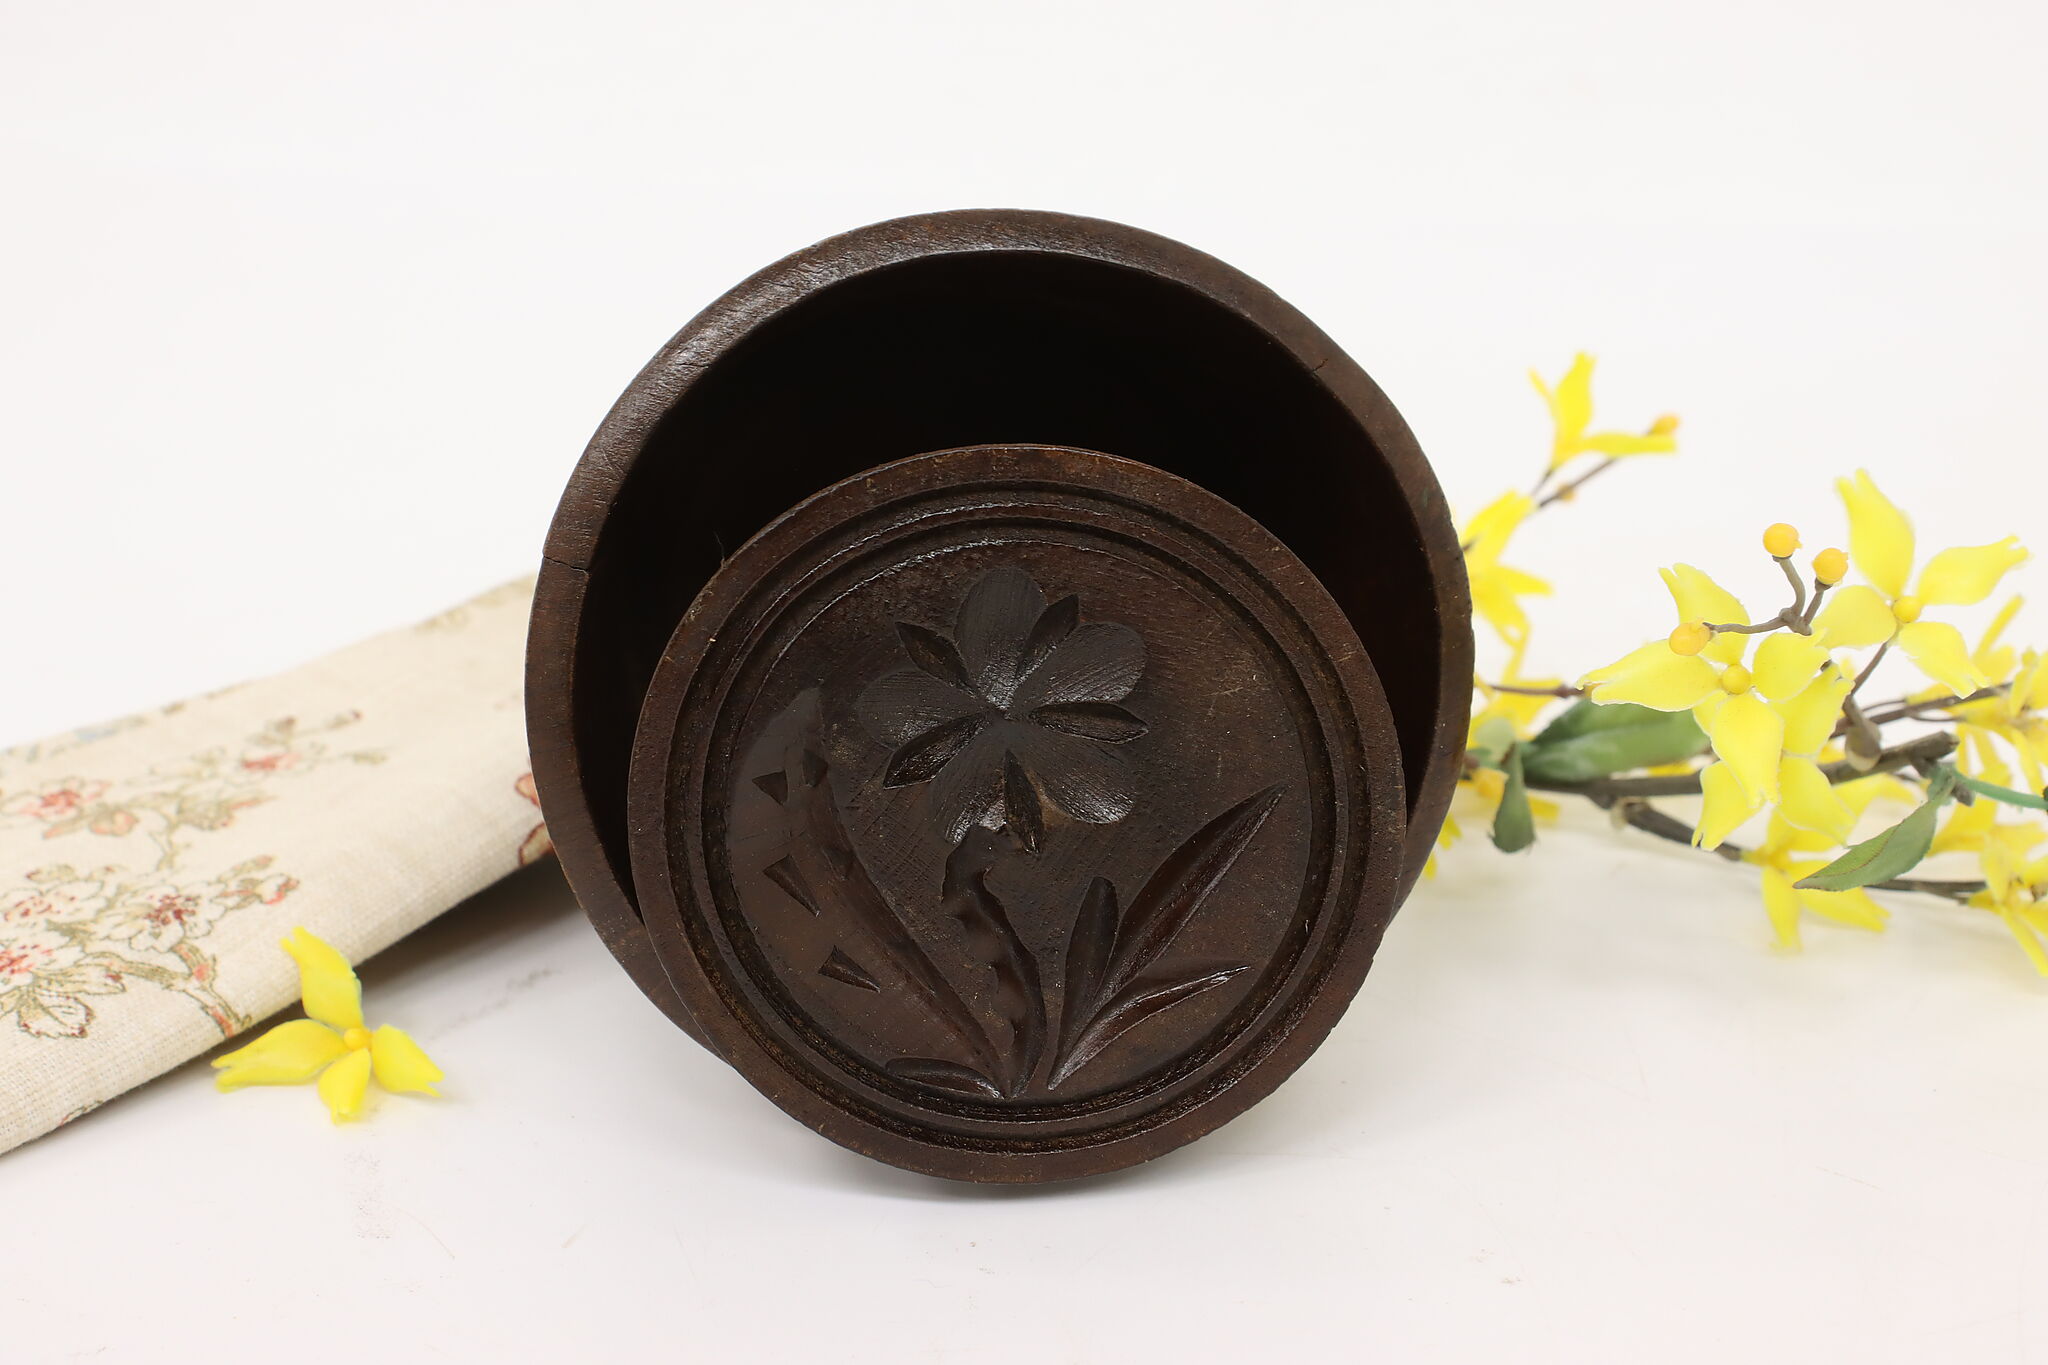 Antique Small Primitive Wood Butter Mold or Press with Wheat Leaf Motif